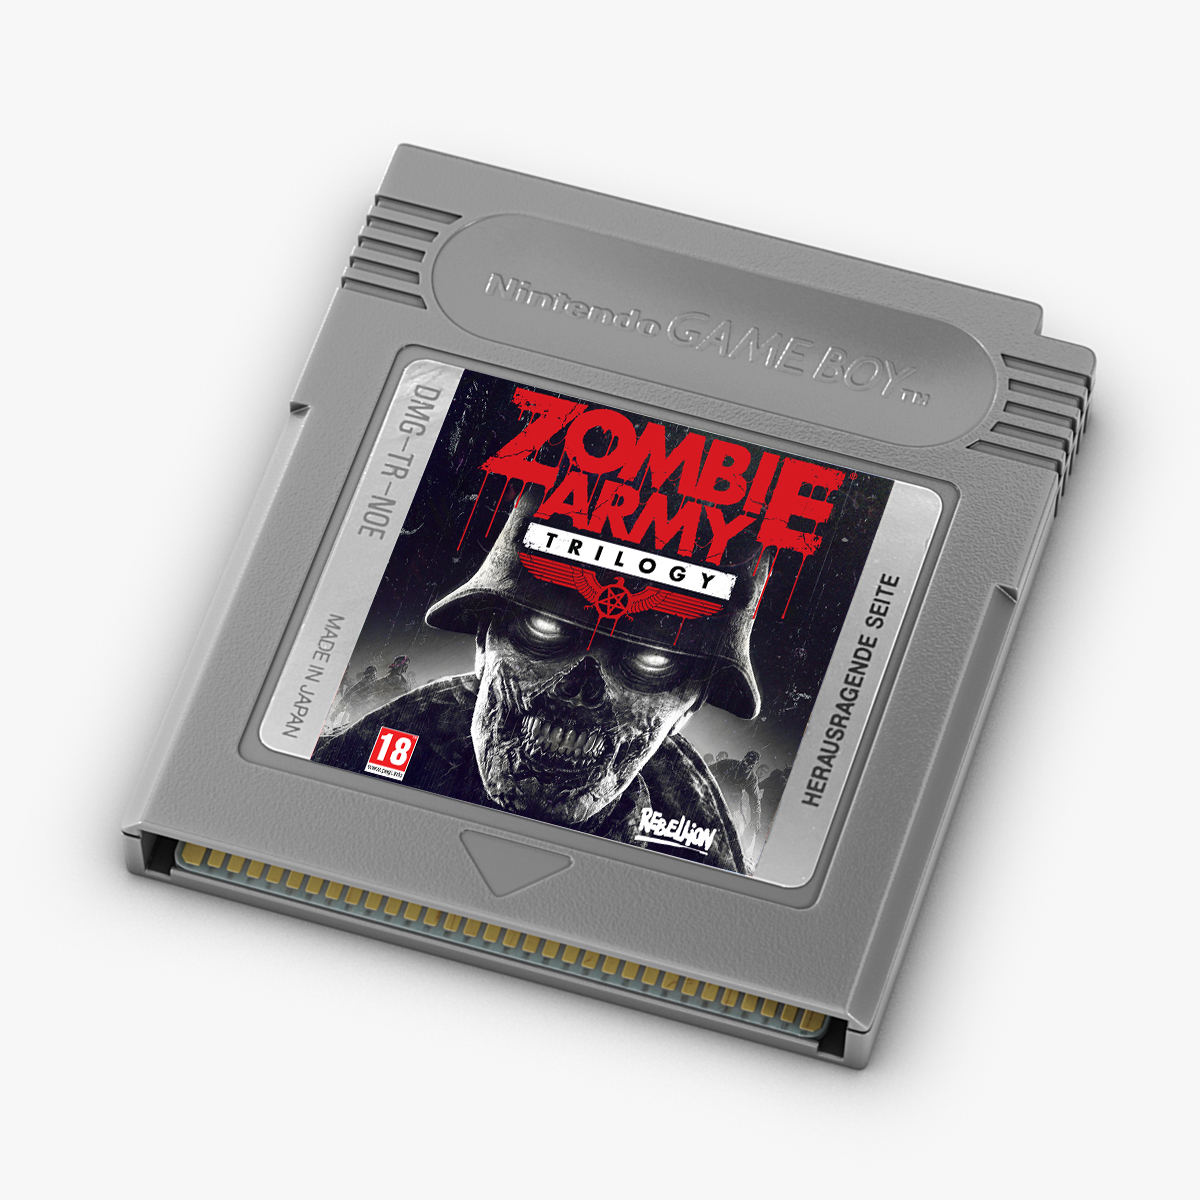 Zombie Army Trilogy coming to Game Boy!